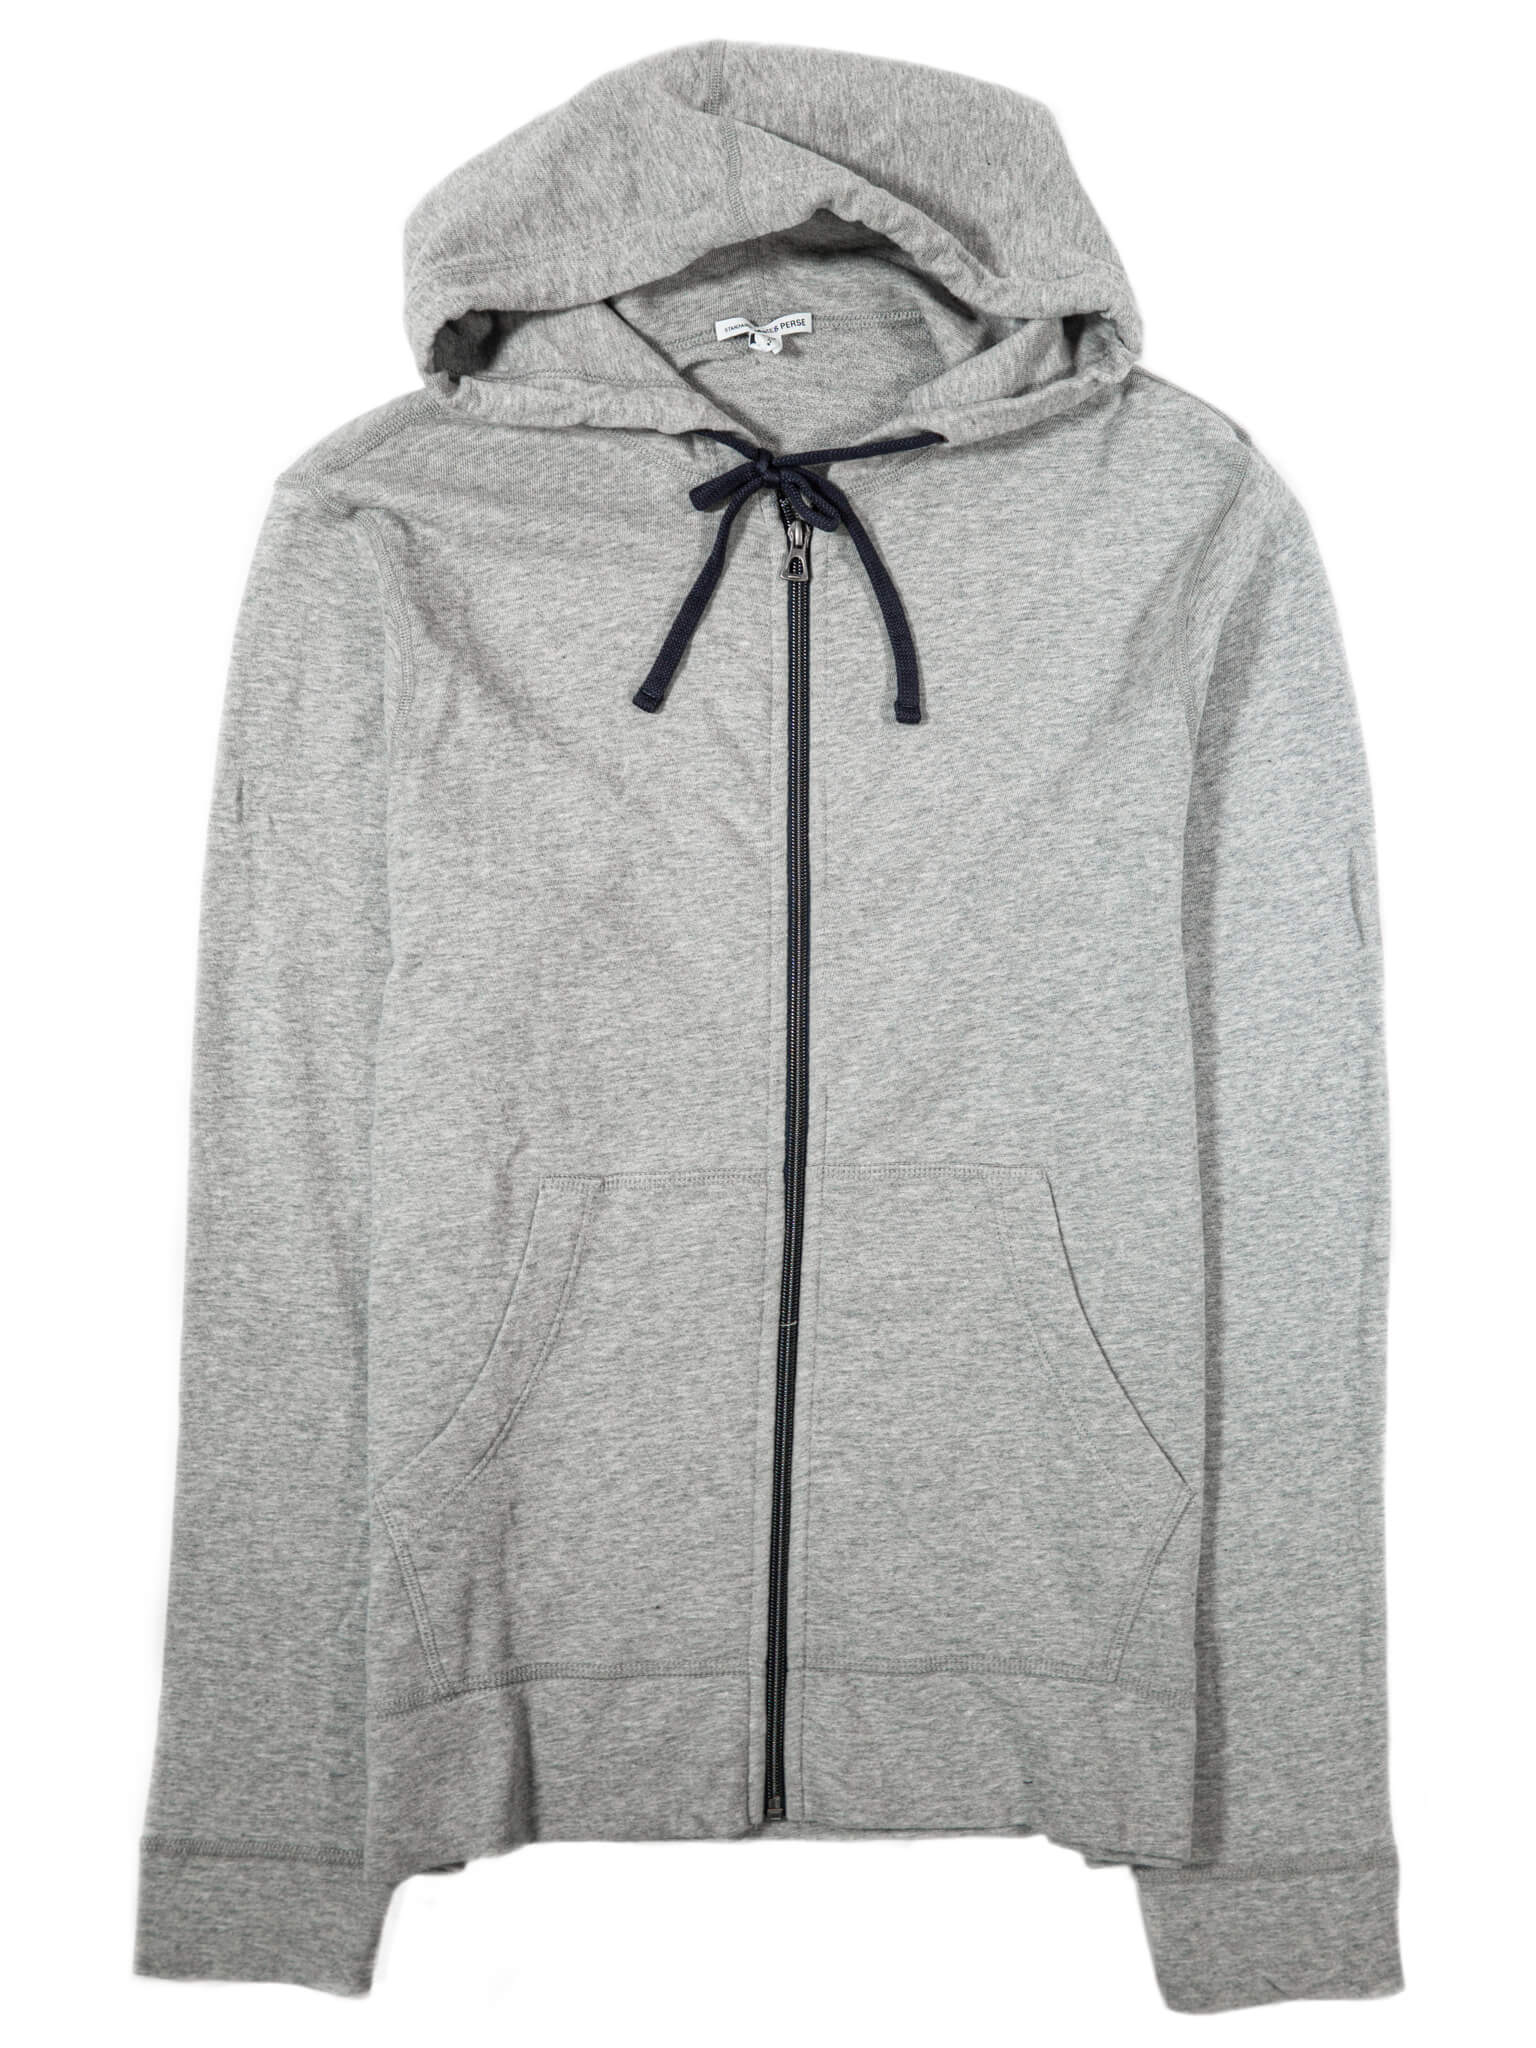 JAMES PERSE FRENCH TERRY HOODIE IN HEATHER – Lawrence Covell